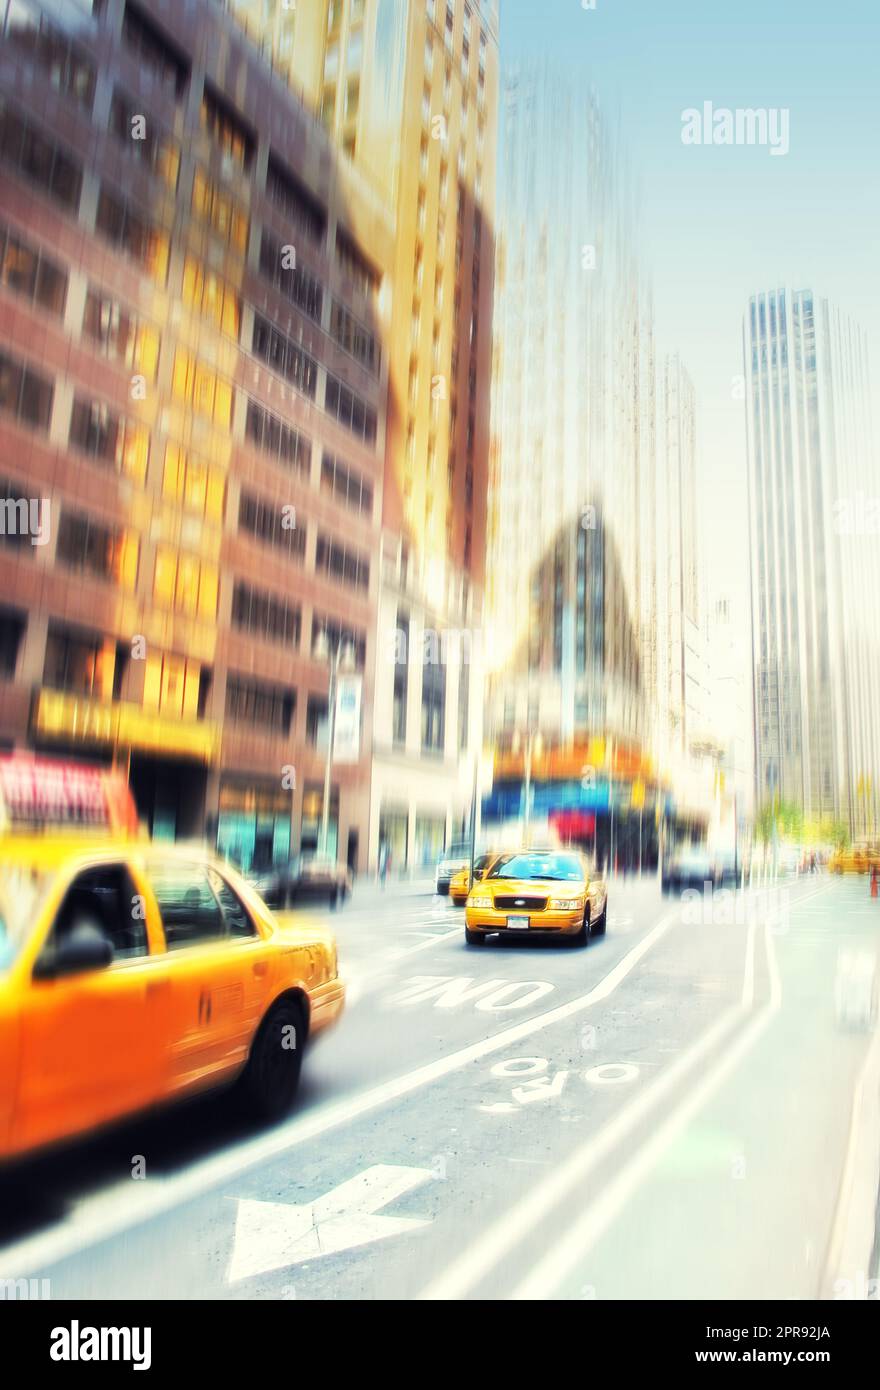 Busy scene with cars and taxis driving and traveling in blurred motion in the city. Commuting through a busy urban town, using public transport to travel the roads and streets to get to a destination Stock Photo